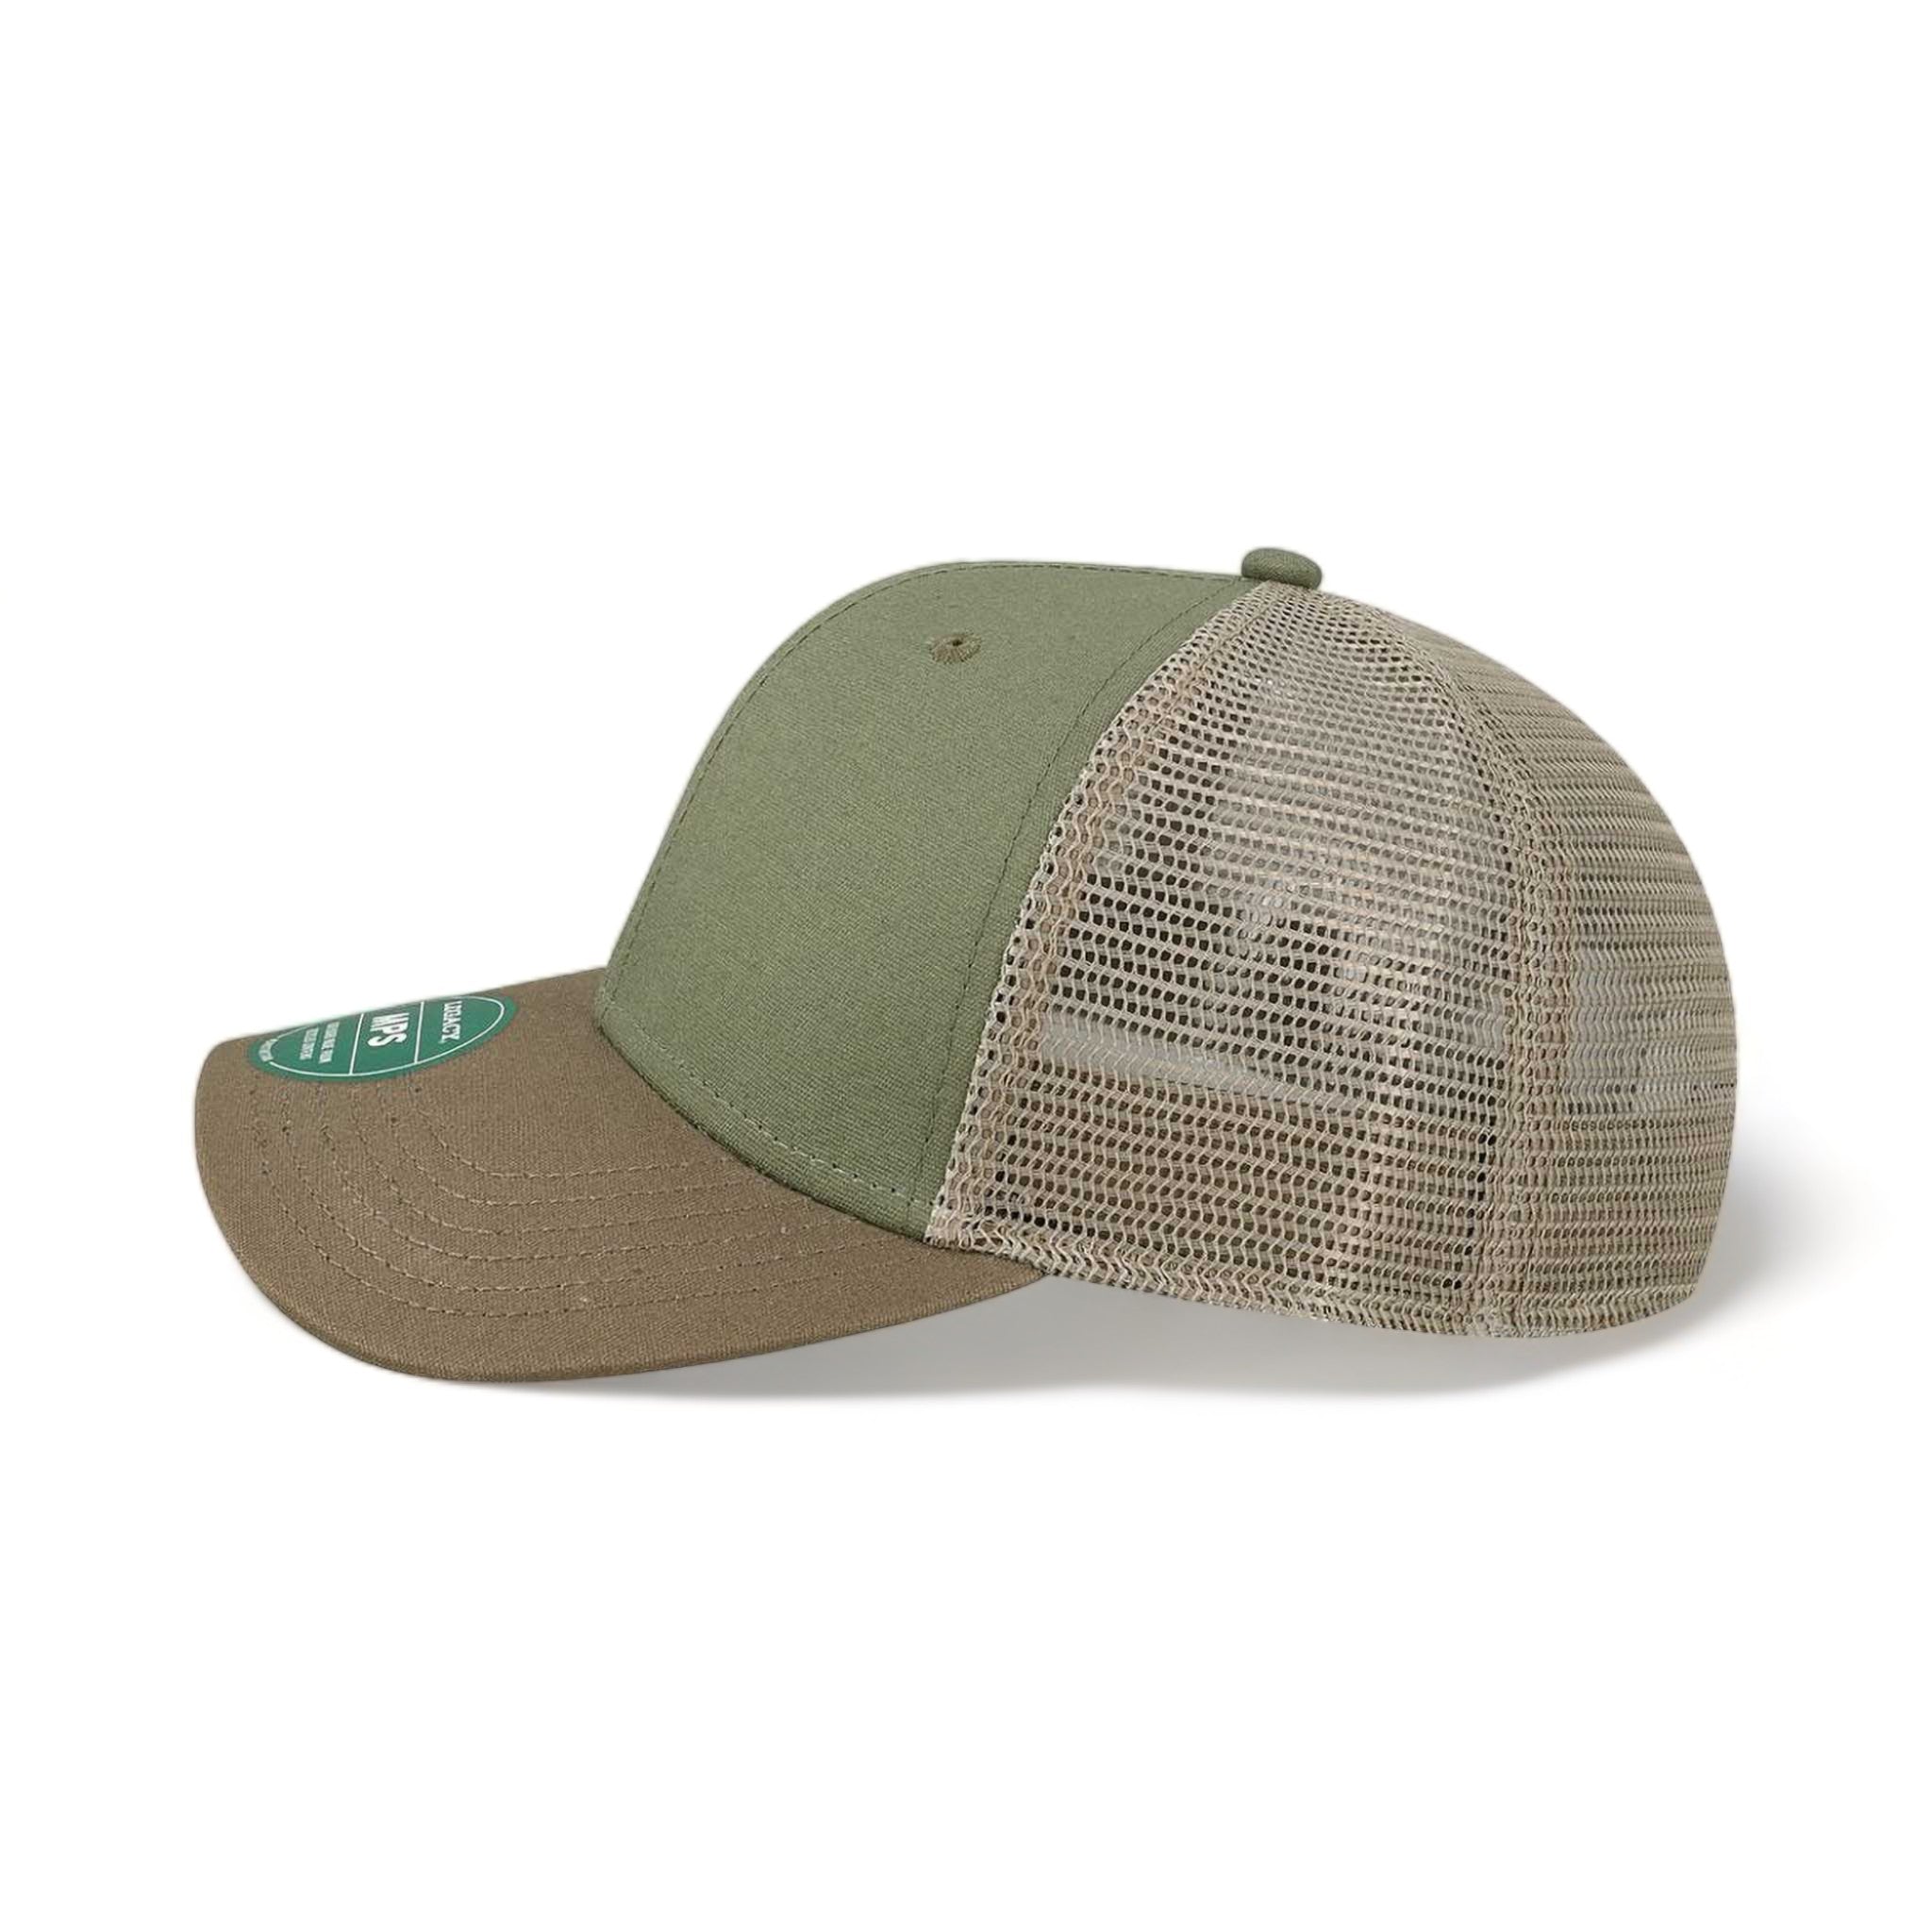 Side view of LEGACY MPS custom hat in olive, dark olive and dark khaki